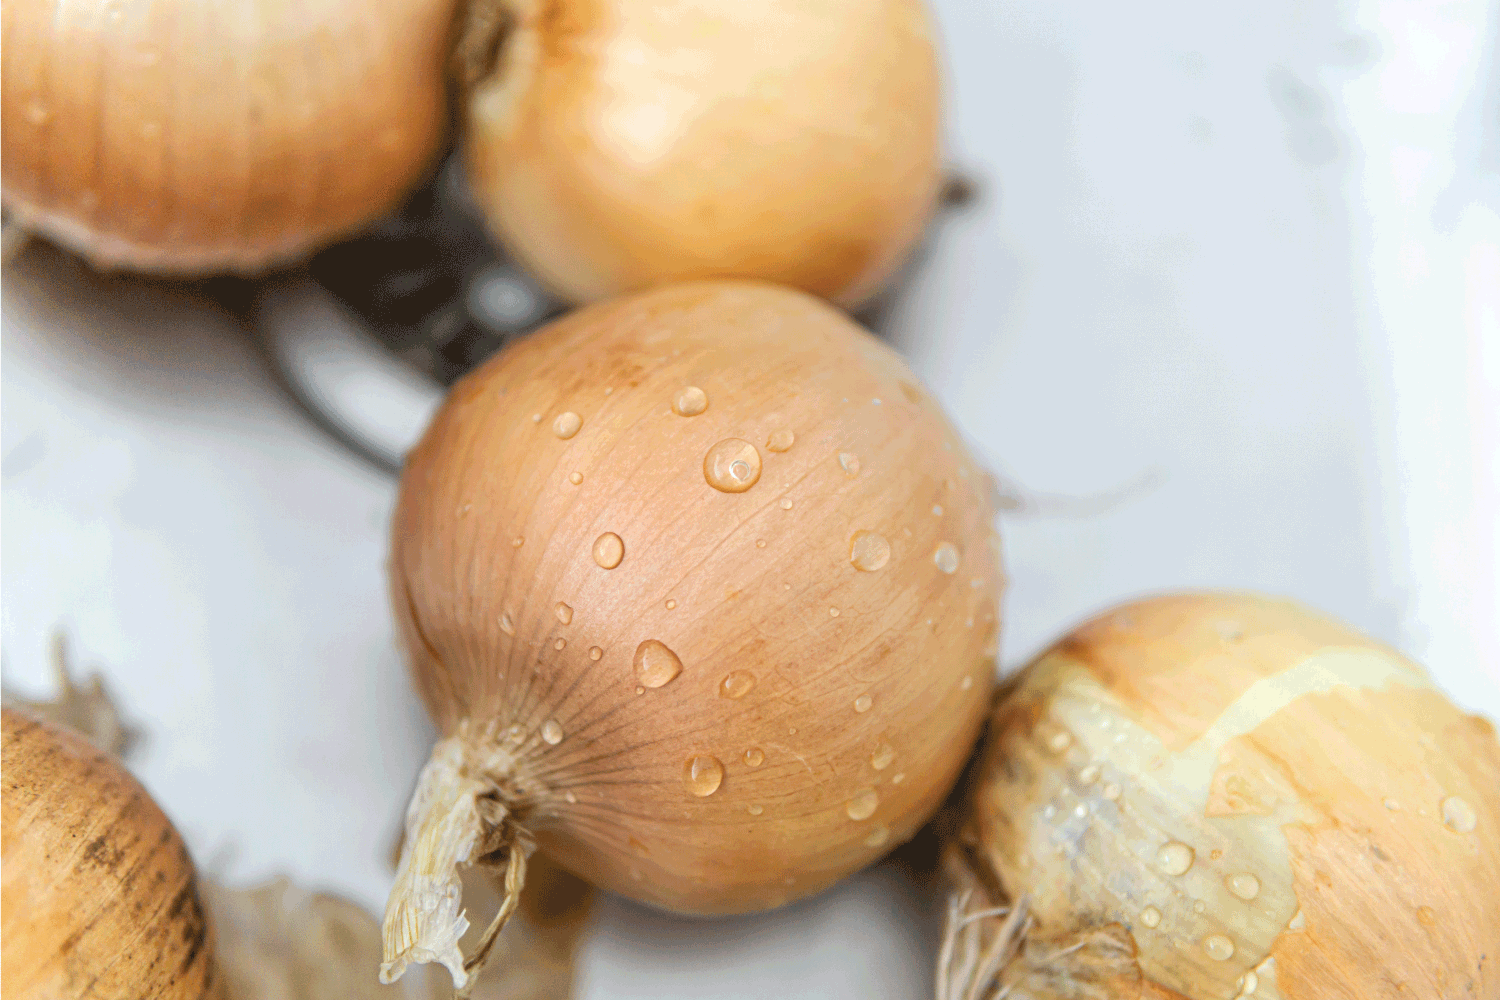 White Onions washed in a kitchen sink